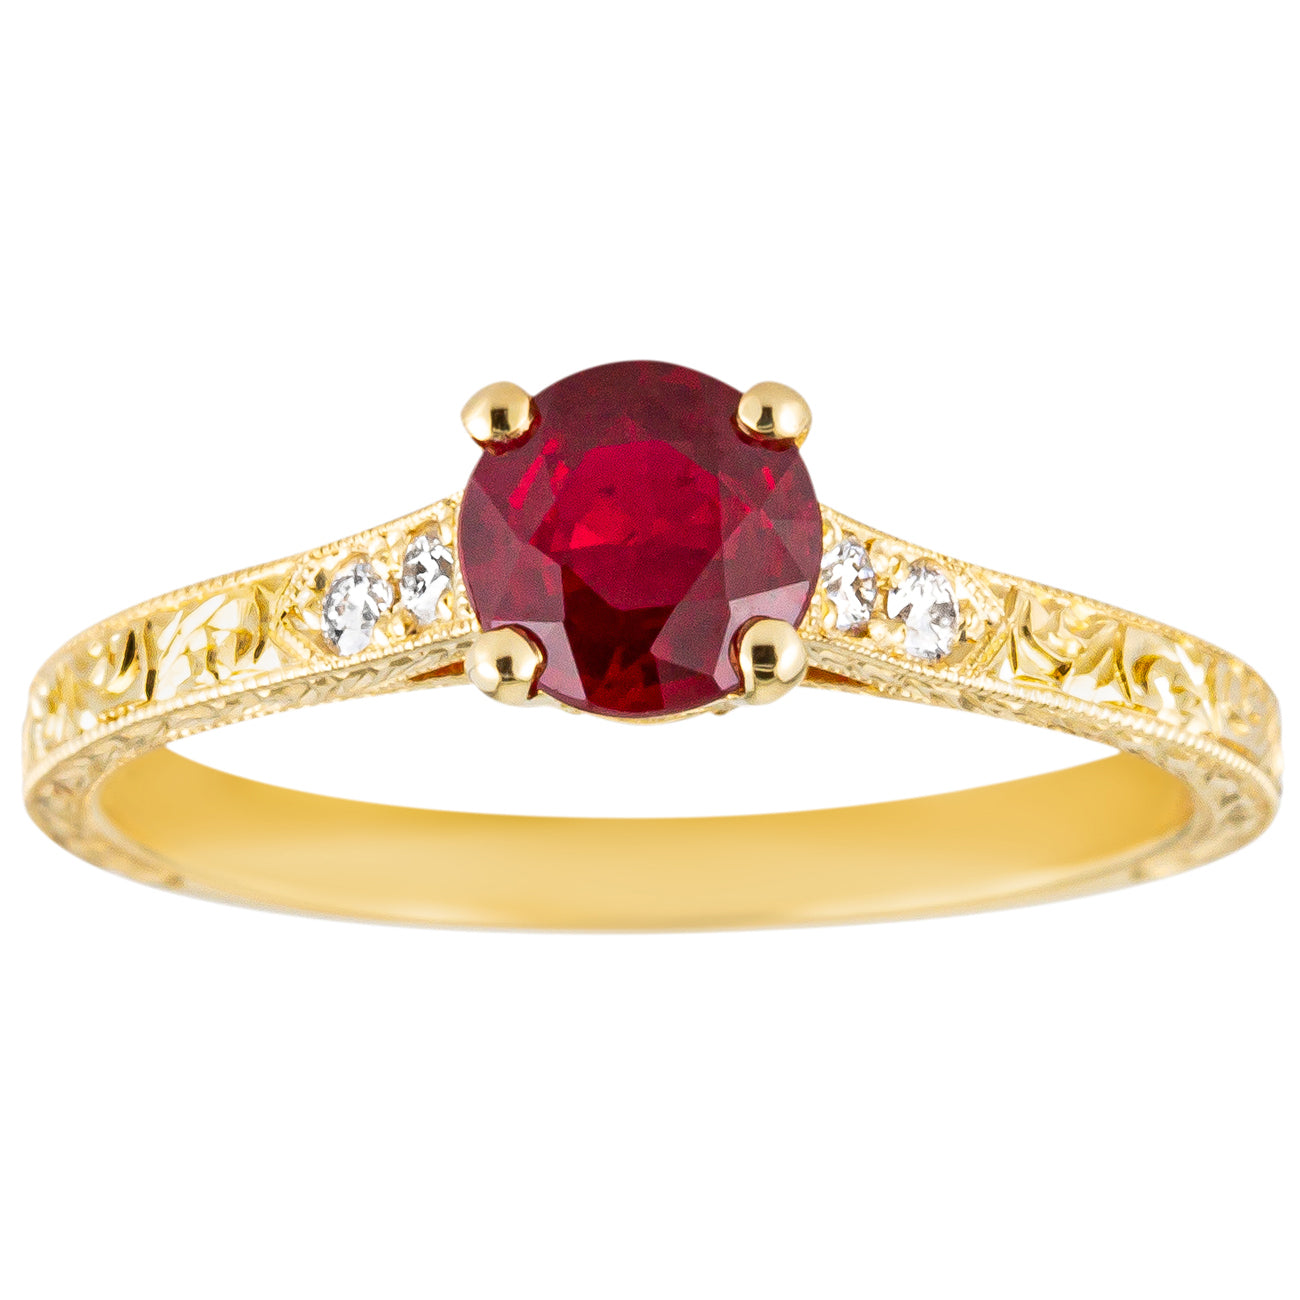 Engraved Ruby Ring in 18ct Yellow Gold with Diamond Shoulders